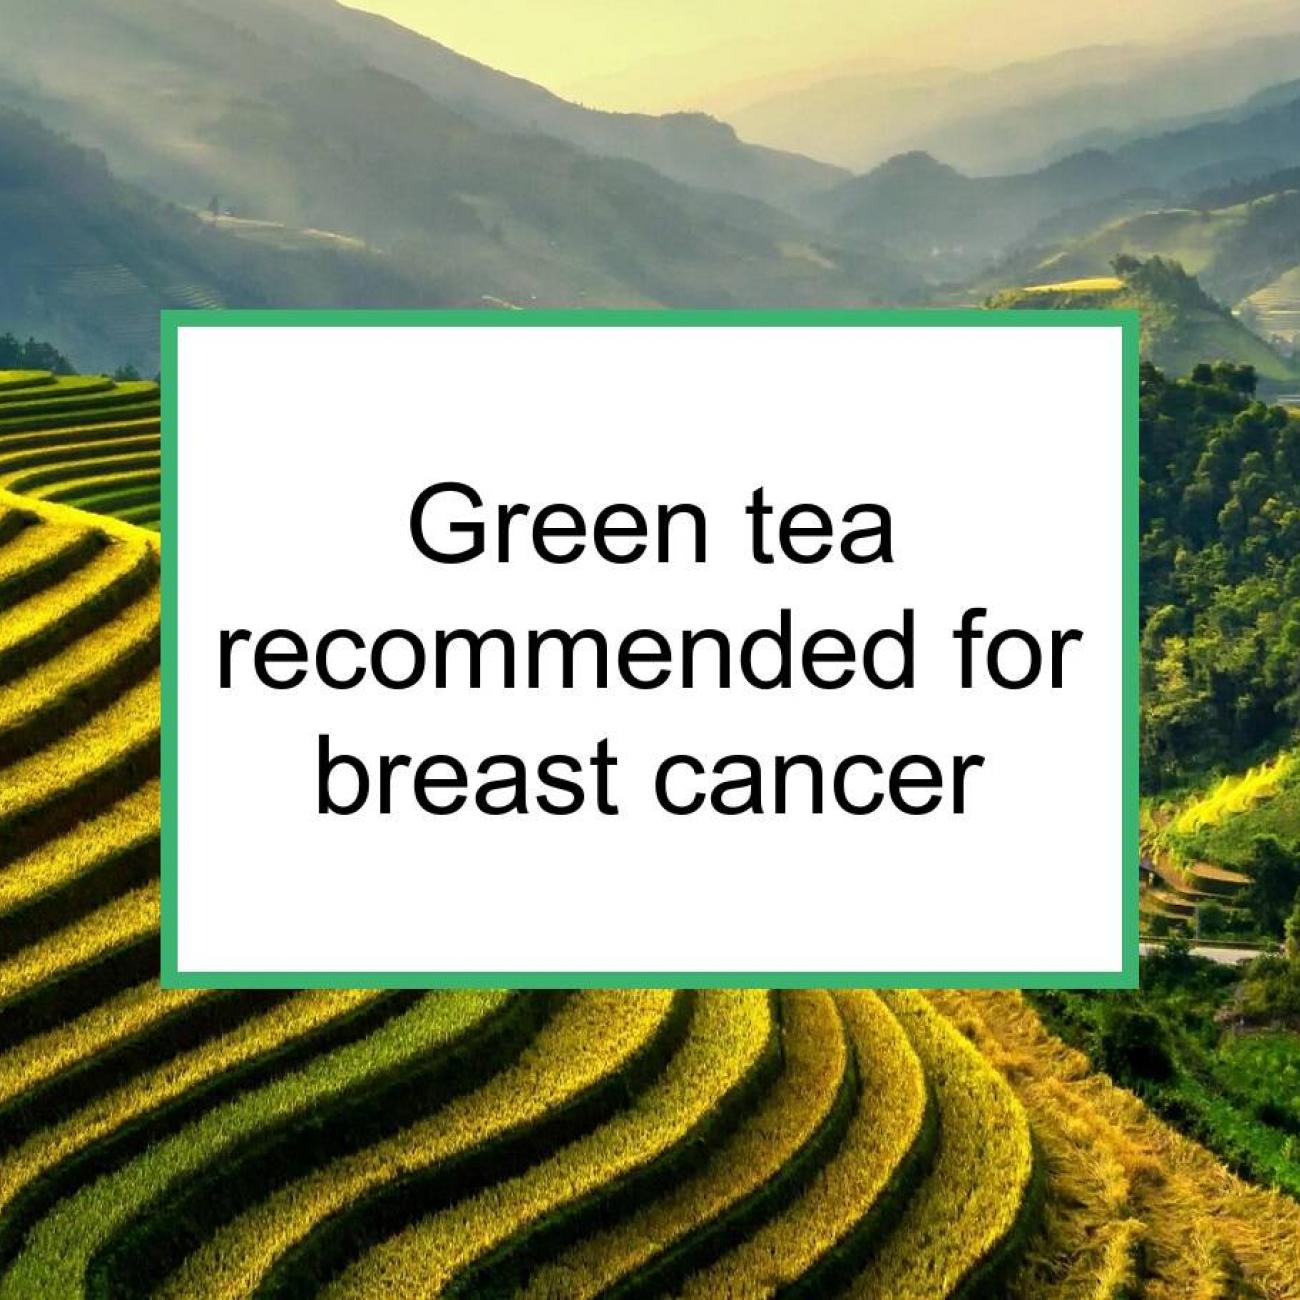 List of plants and other compounds in prevention of breast cancer